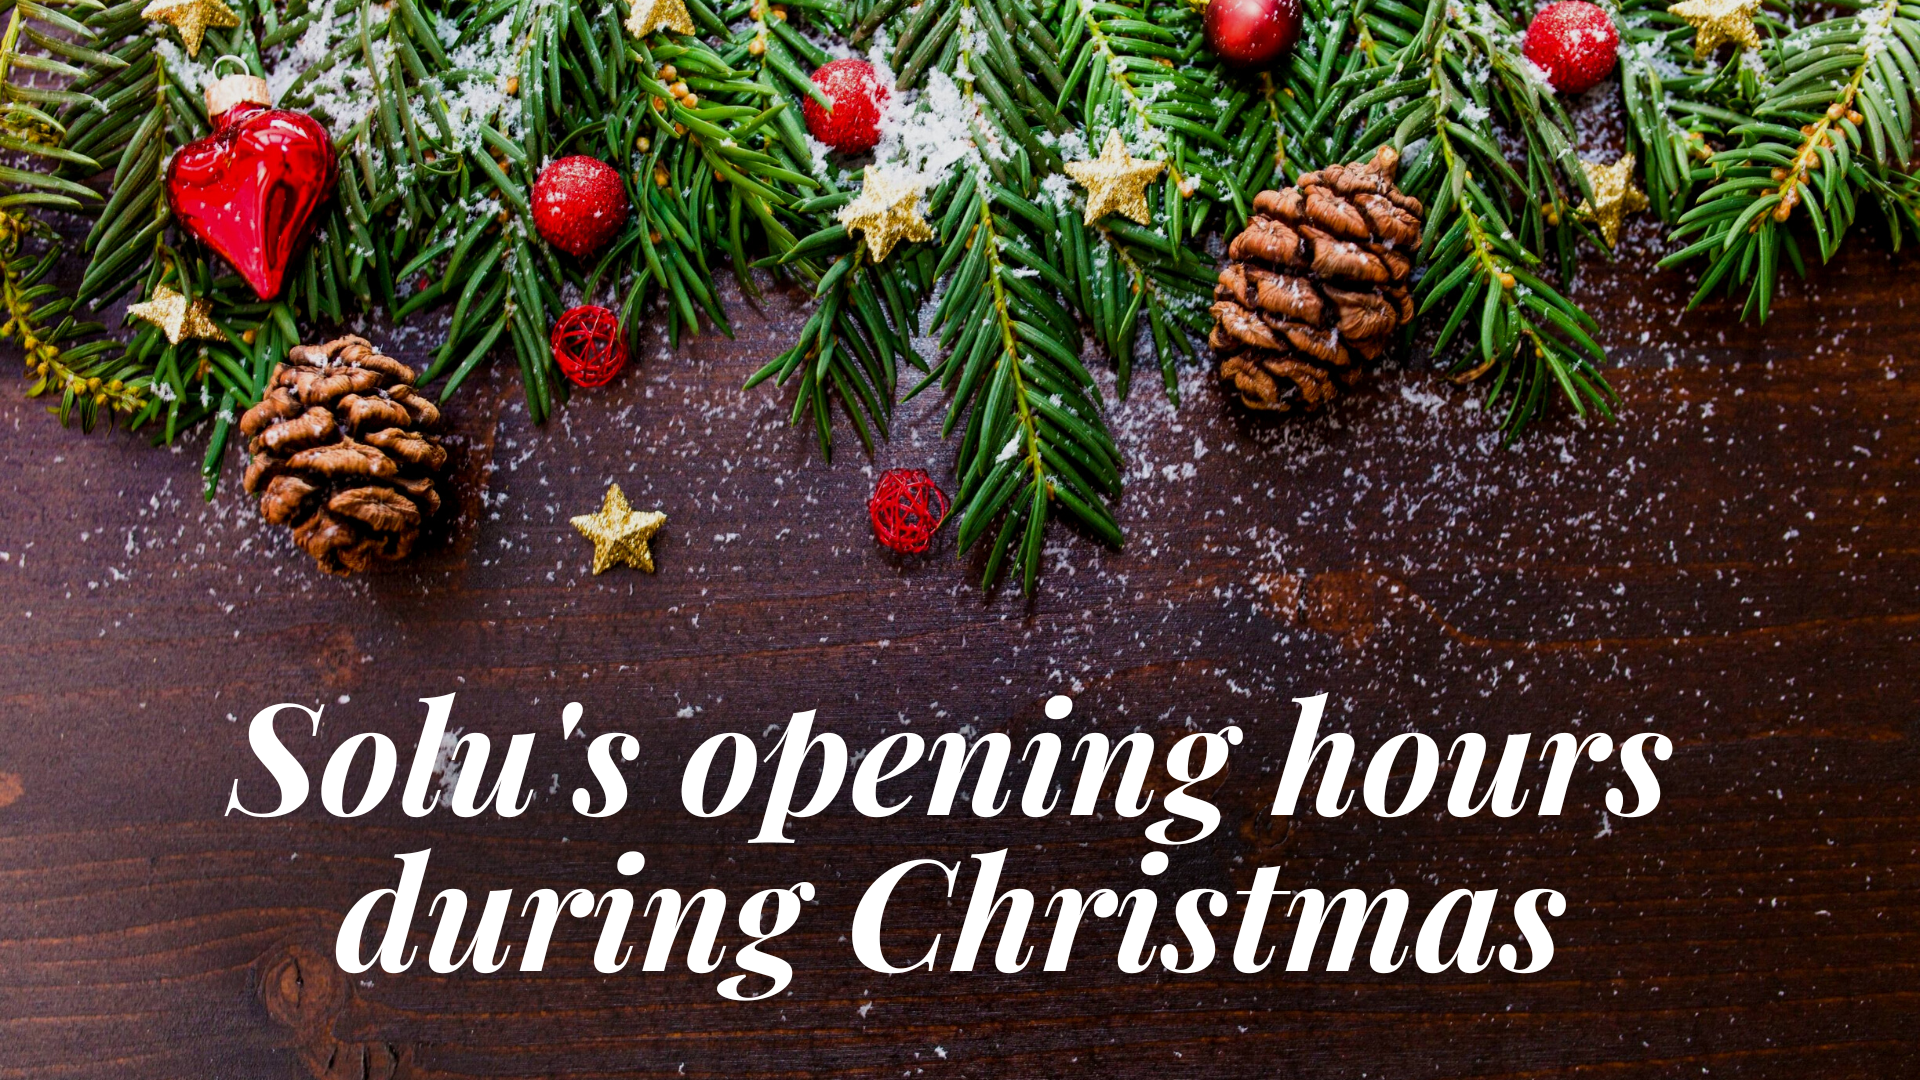 Solu’s opening hours during Christmas